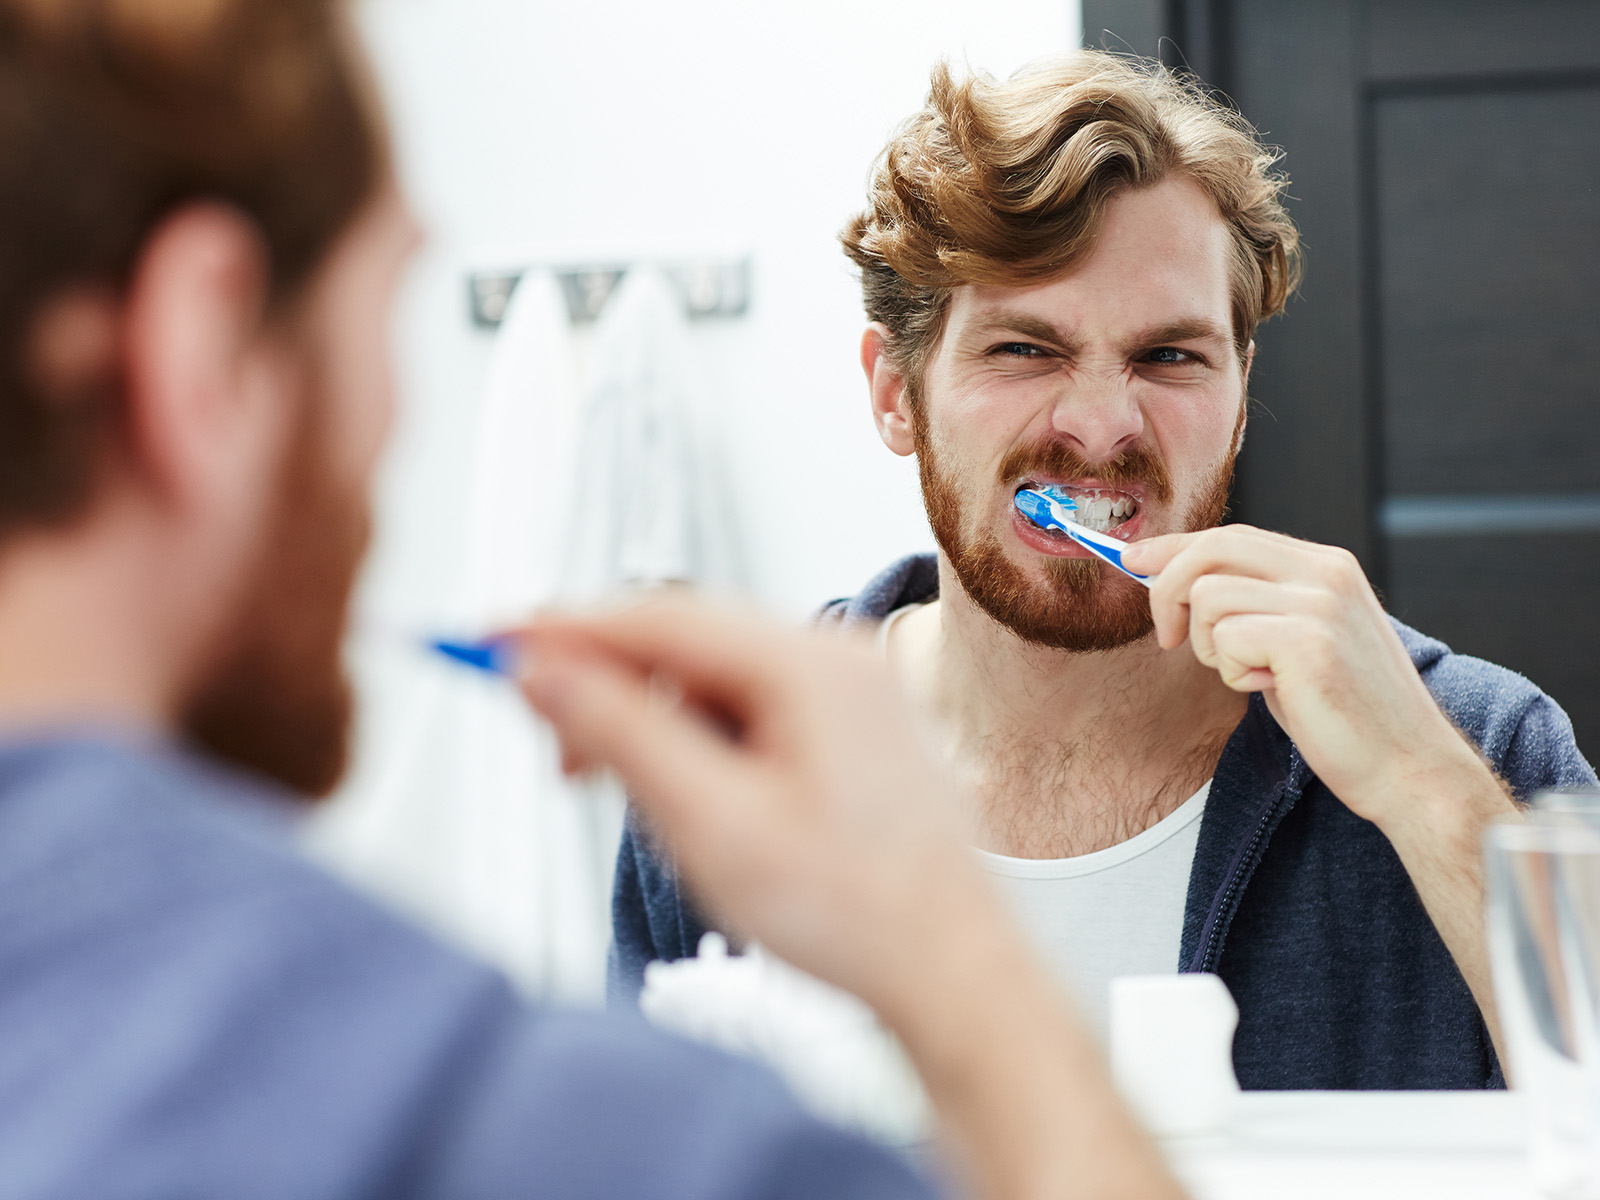 How Do You Know If You’re Over Brushing Your Teeth?